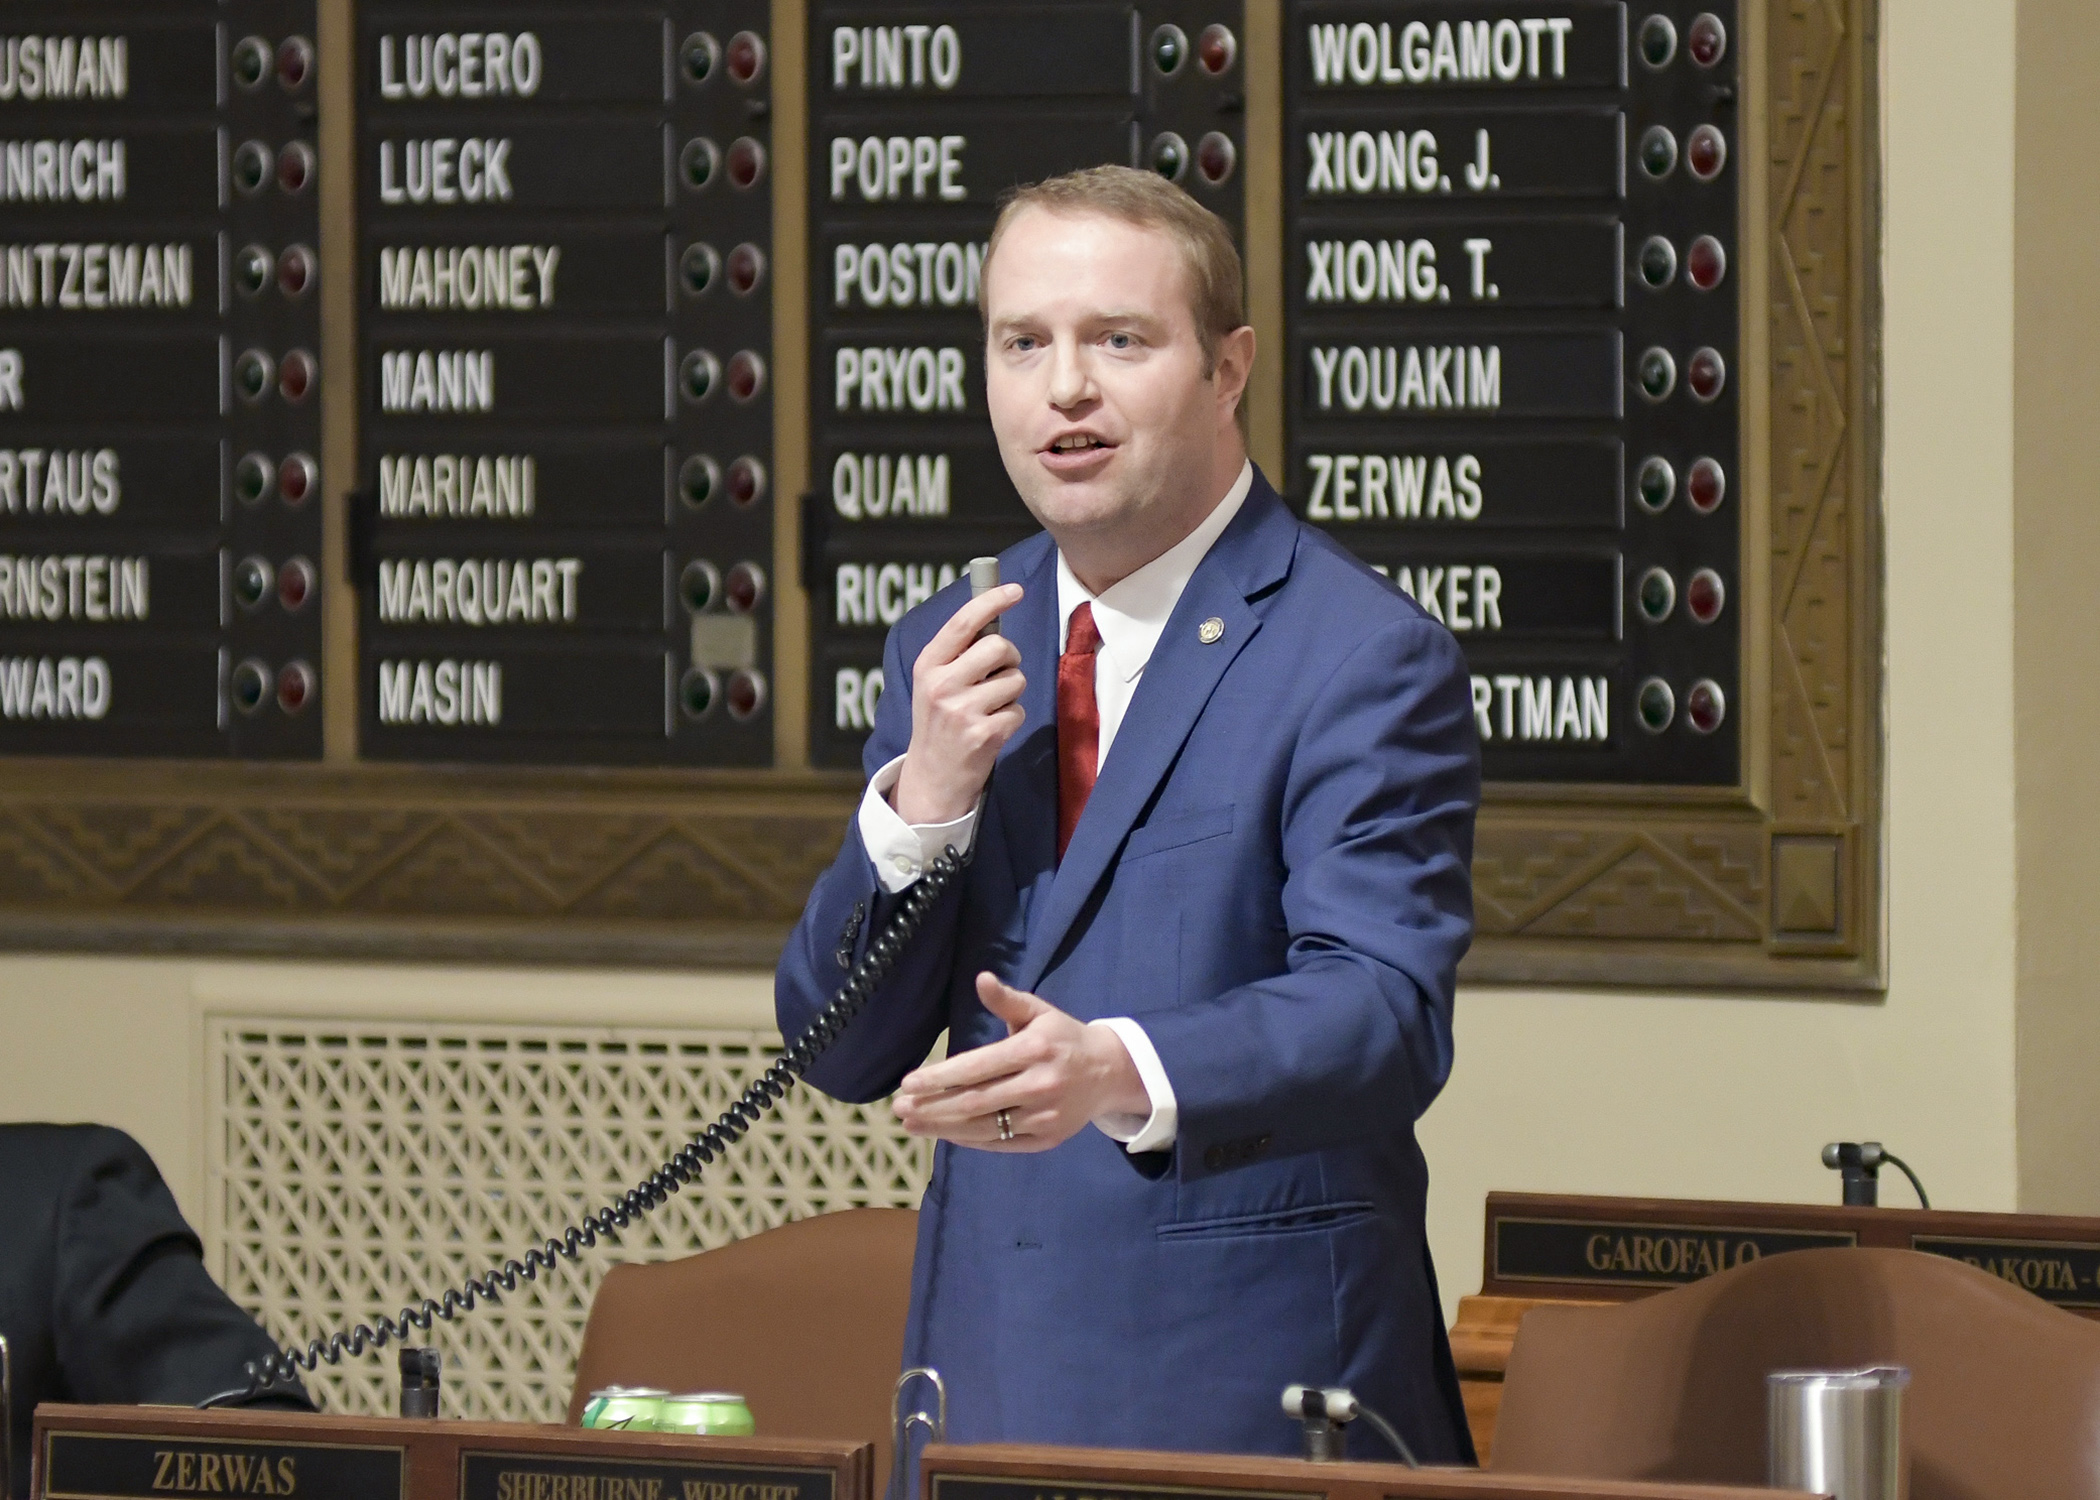 Rep. Nick Zerwas, shown here speaking on the House Floor in 2019, announced Monday he will resign his House seat in December following a recent heart surgery. Photo by Andrew VonBank